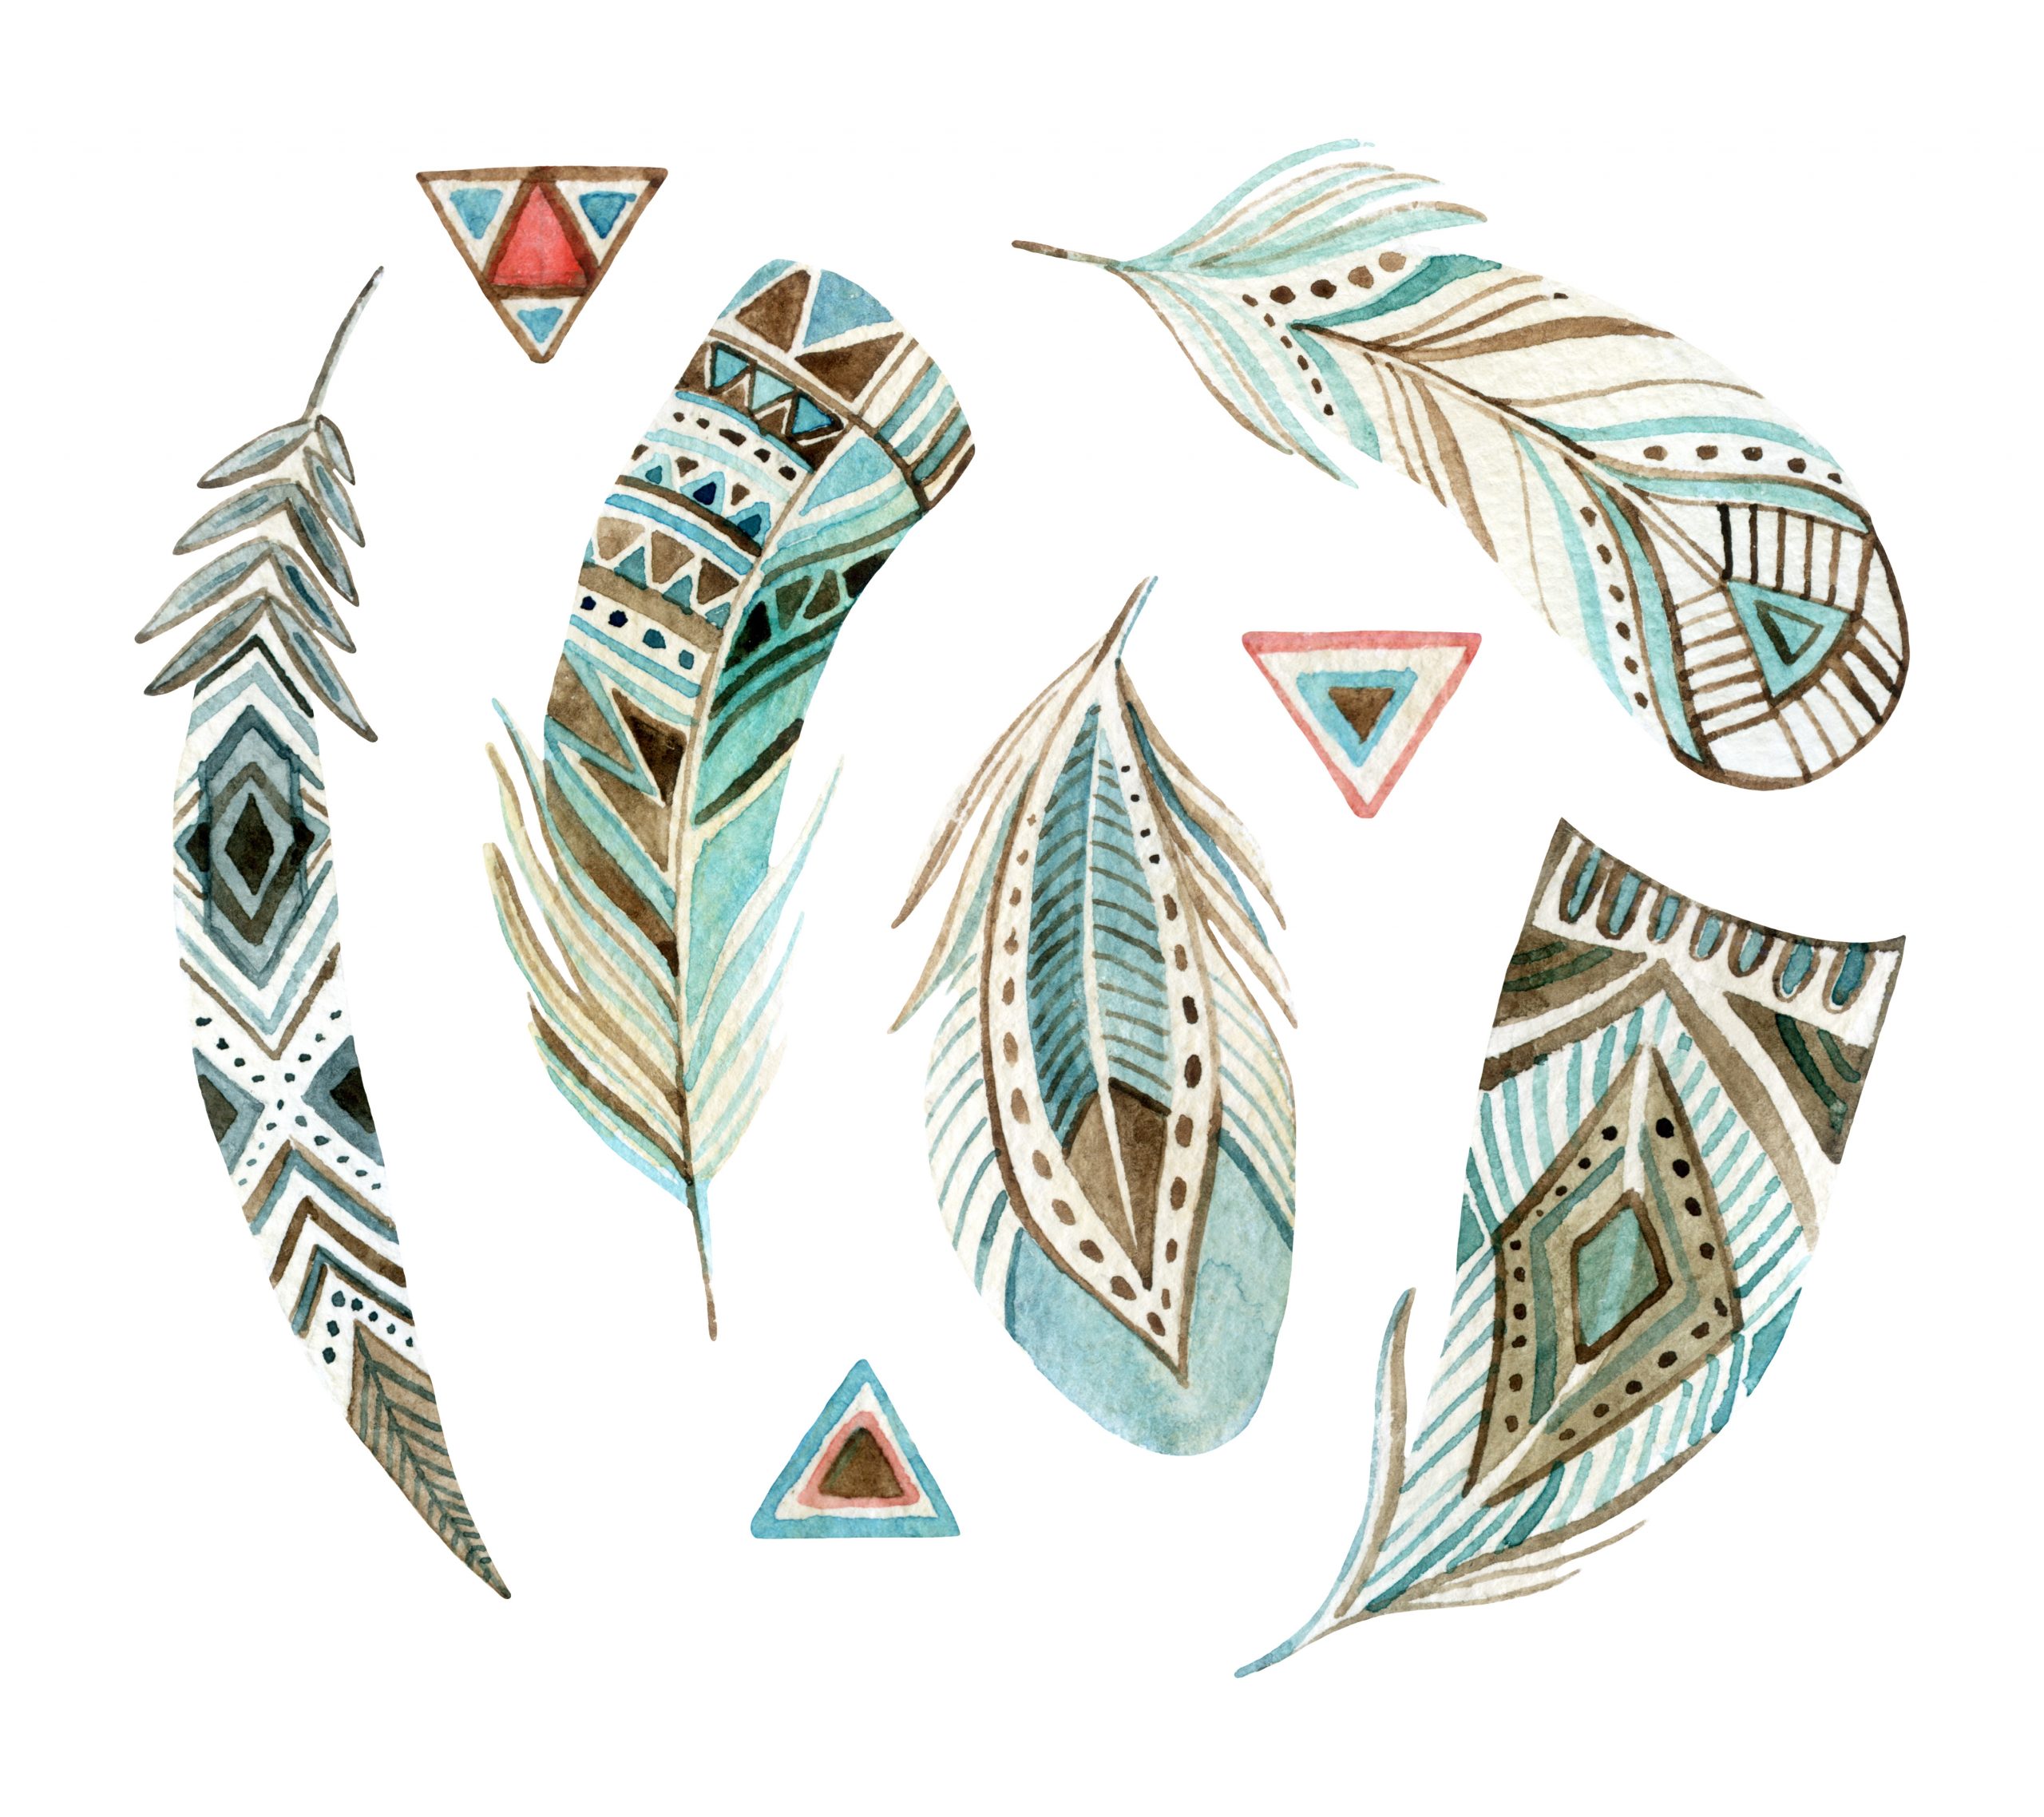 Crossed Lances. Tribal Weapon With Feathers. Aztec Set. Watercolor Style On  White Background. Stock Photo, Picture and Royalty Free Image. Image  122024580.